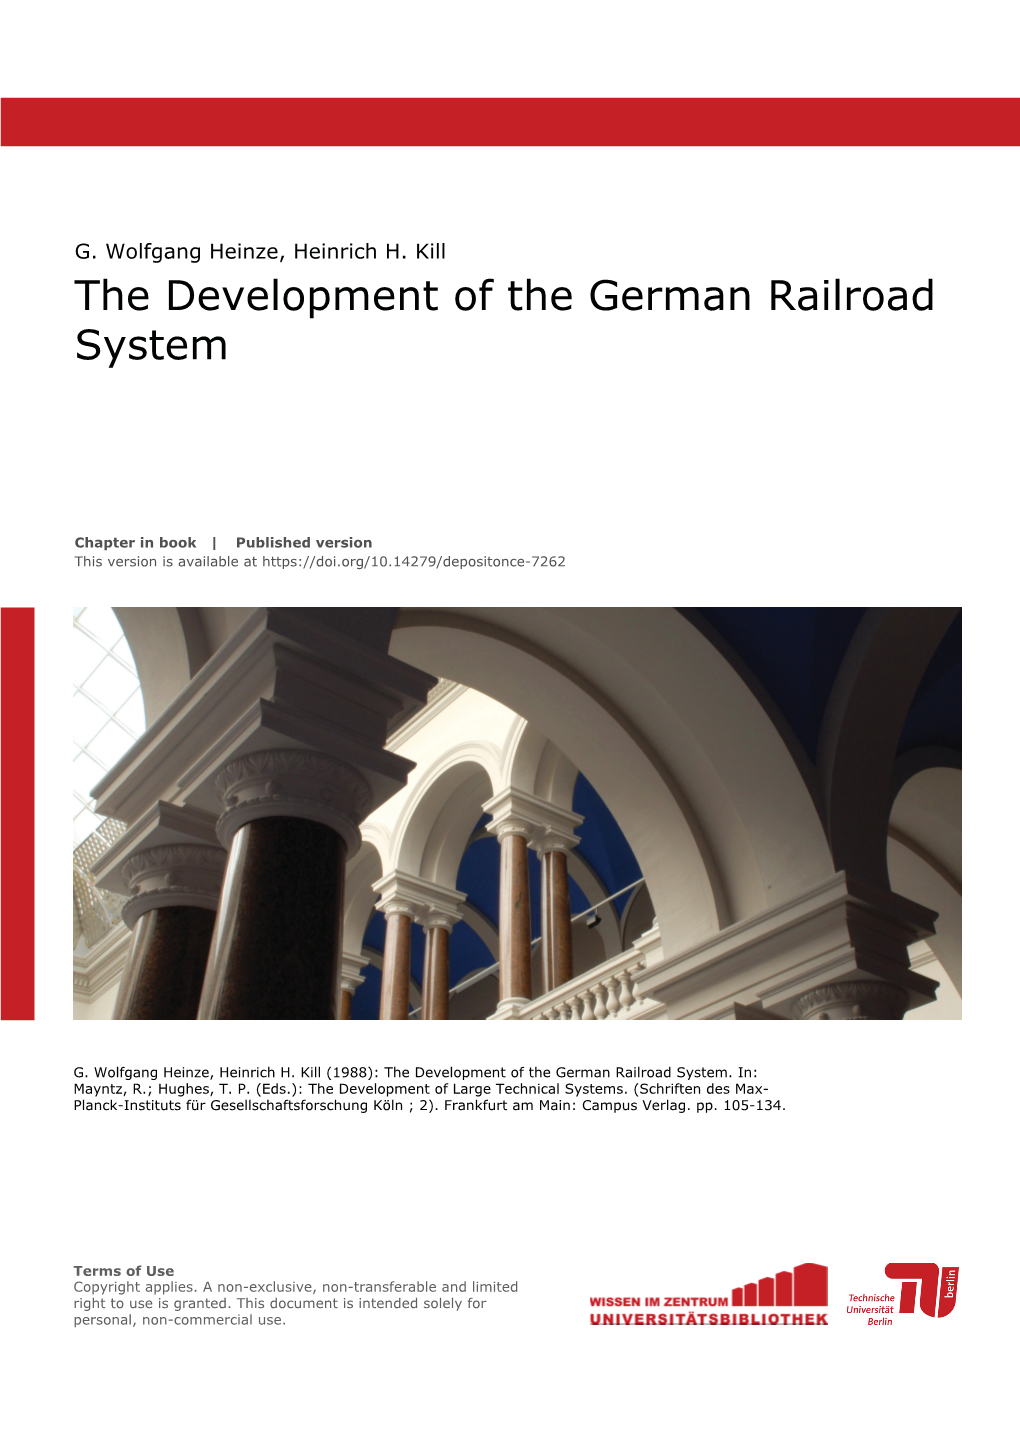 The Development of the German Railroad System